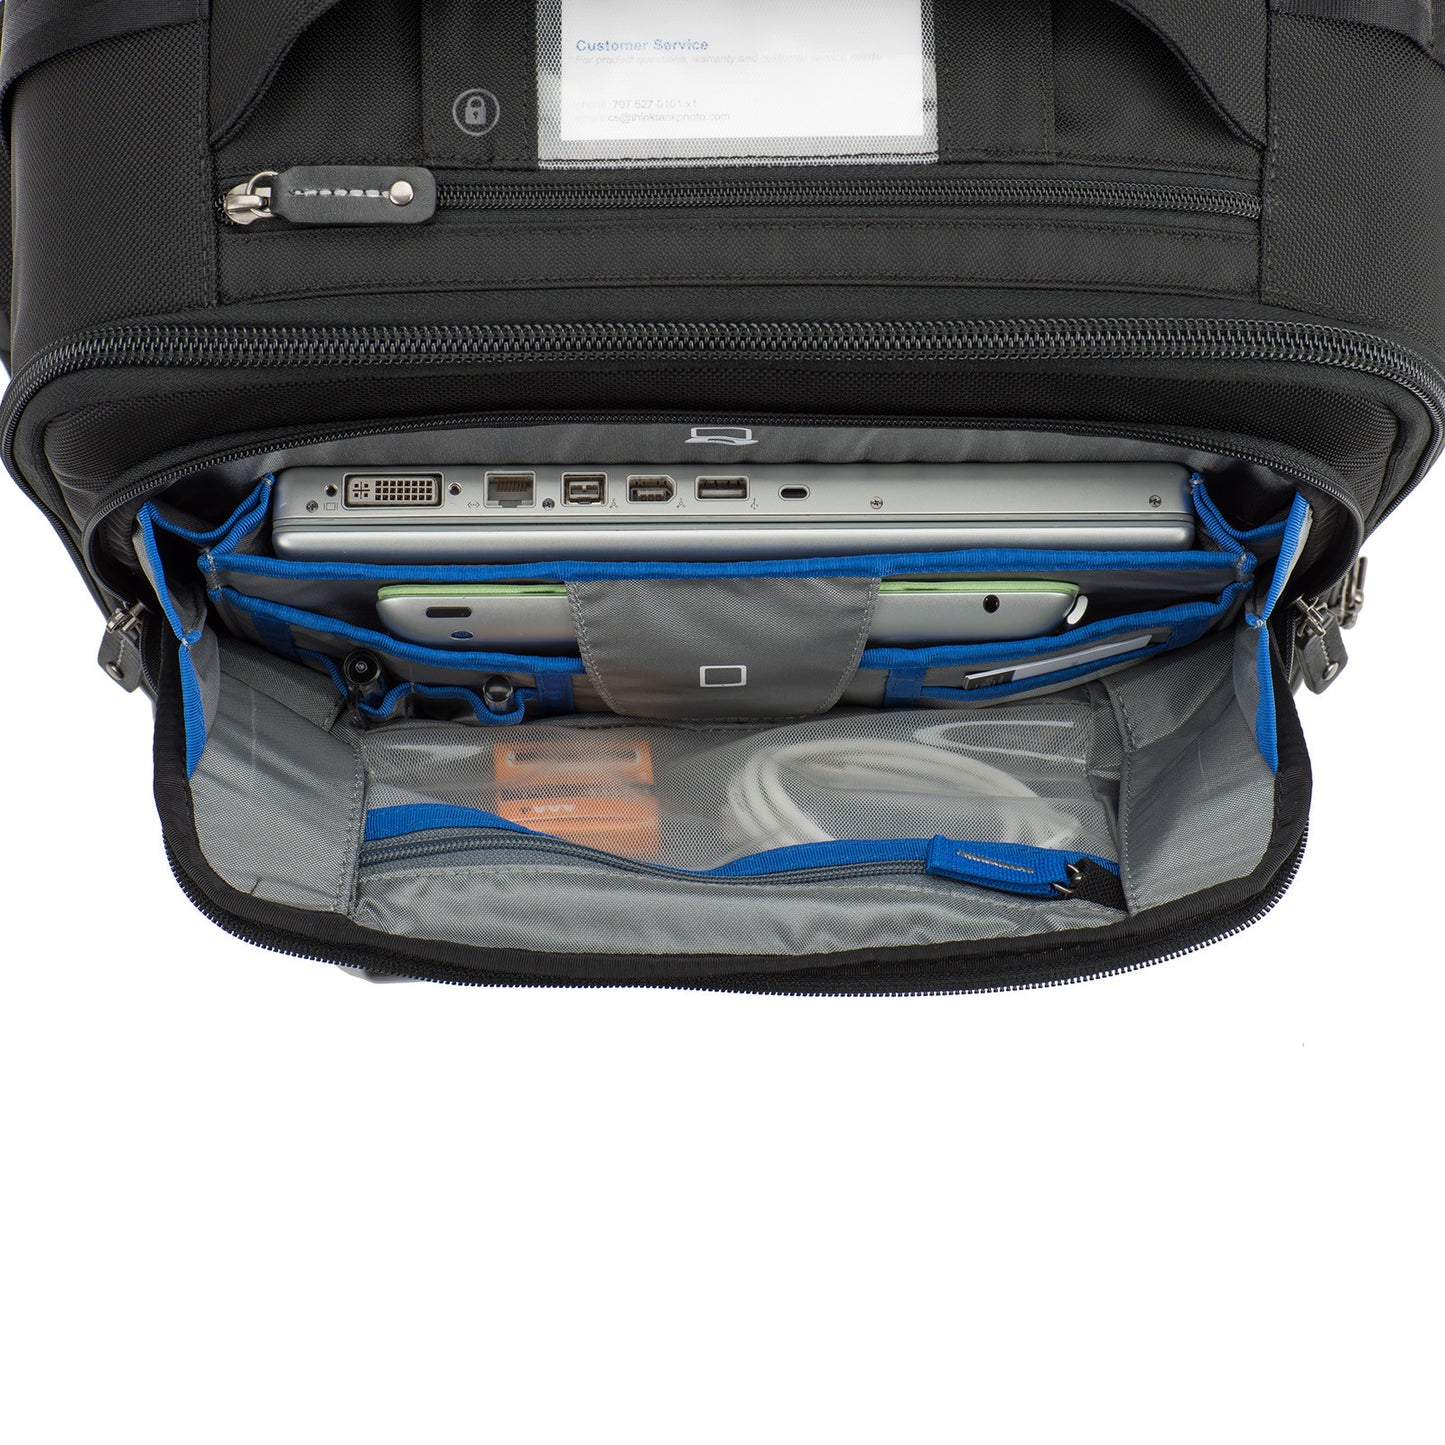 
                  
                    Dedicated padded laptop and tablet compartments located in a lockable pocket. Fits 17” laptop and a 10” tablet
                  
                